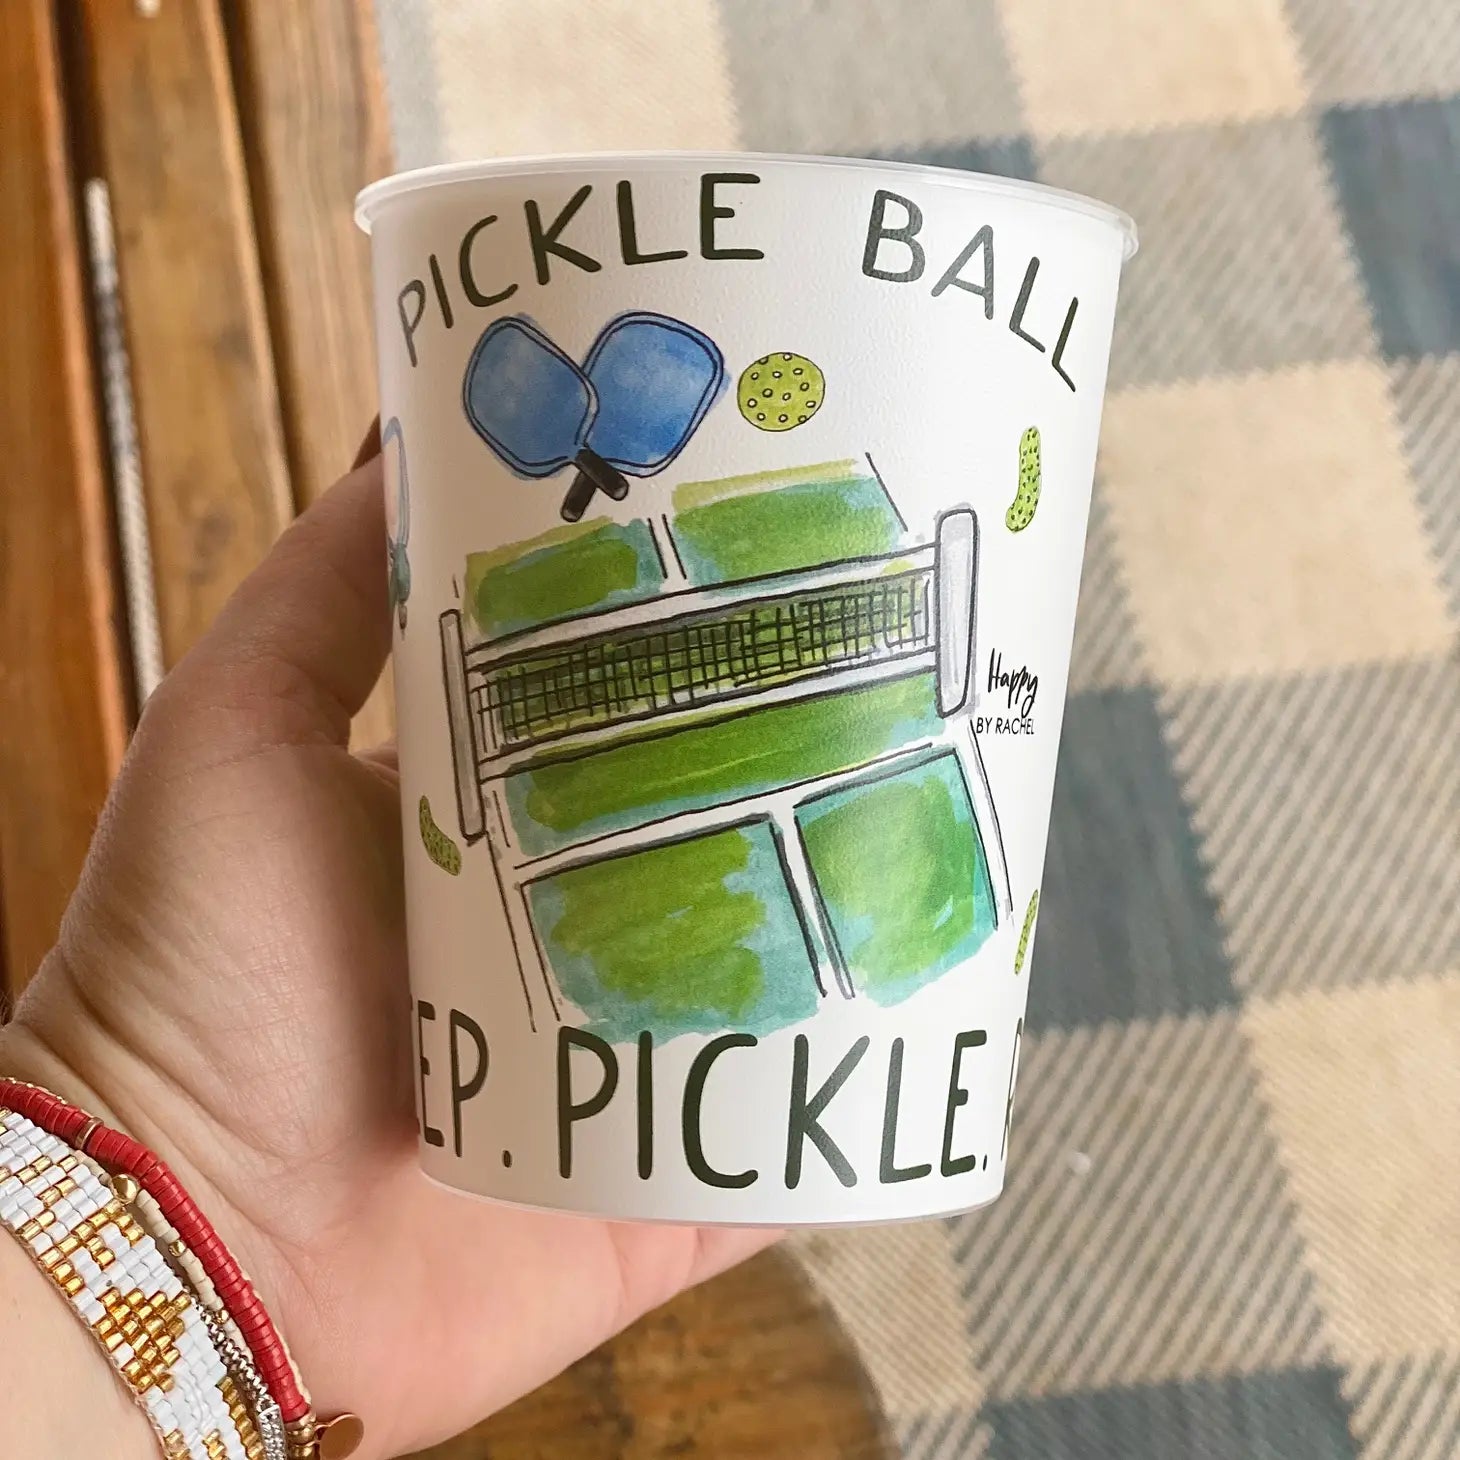 Pickle Ball Reusable Cups